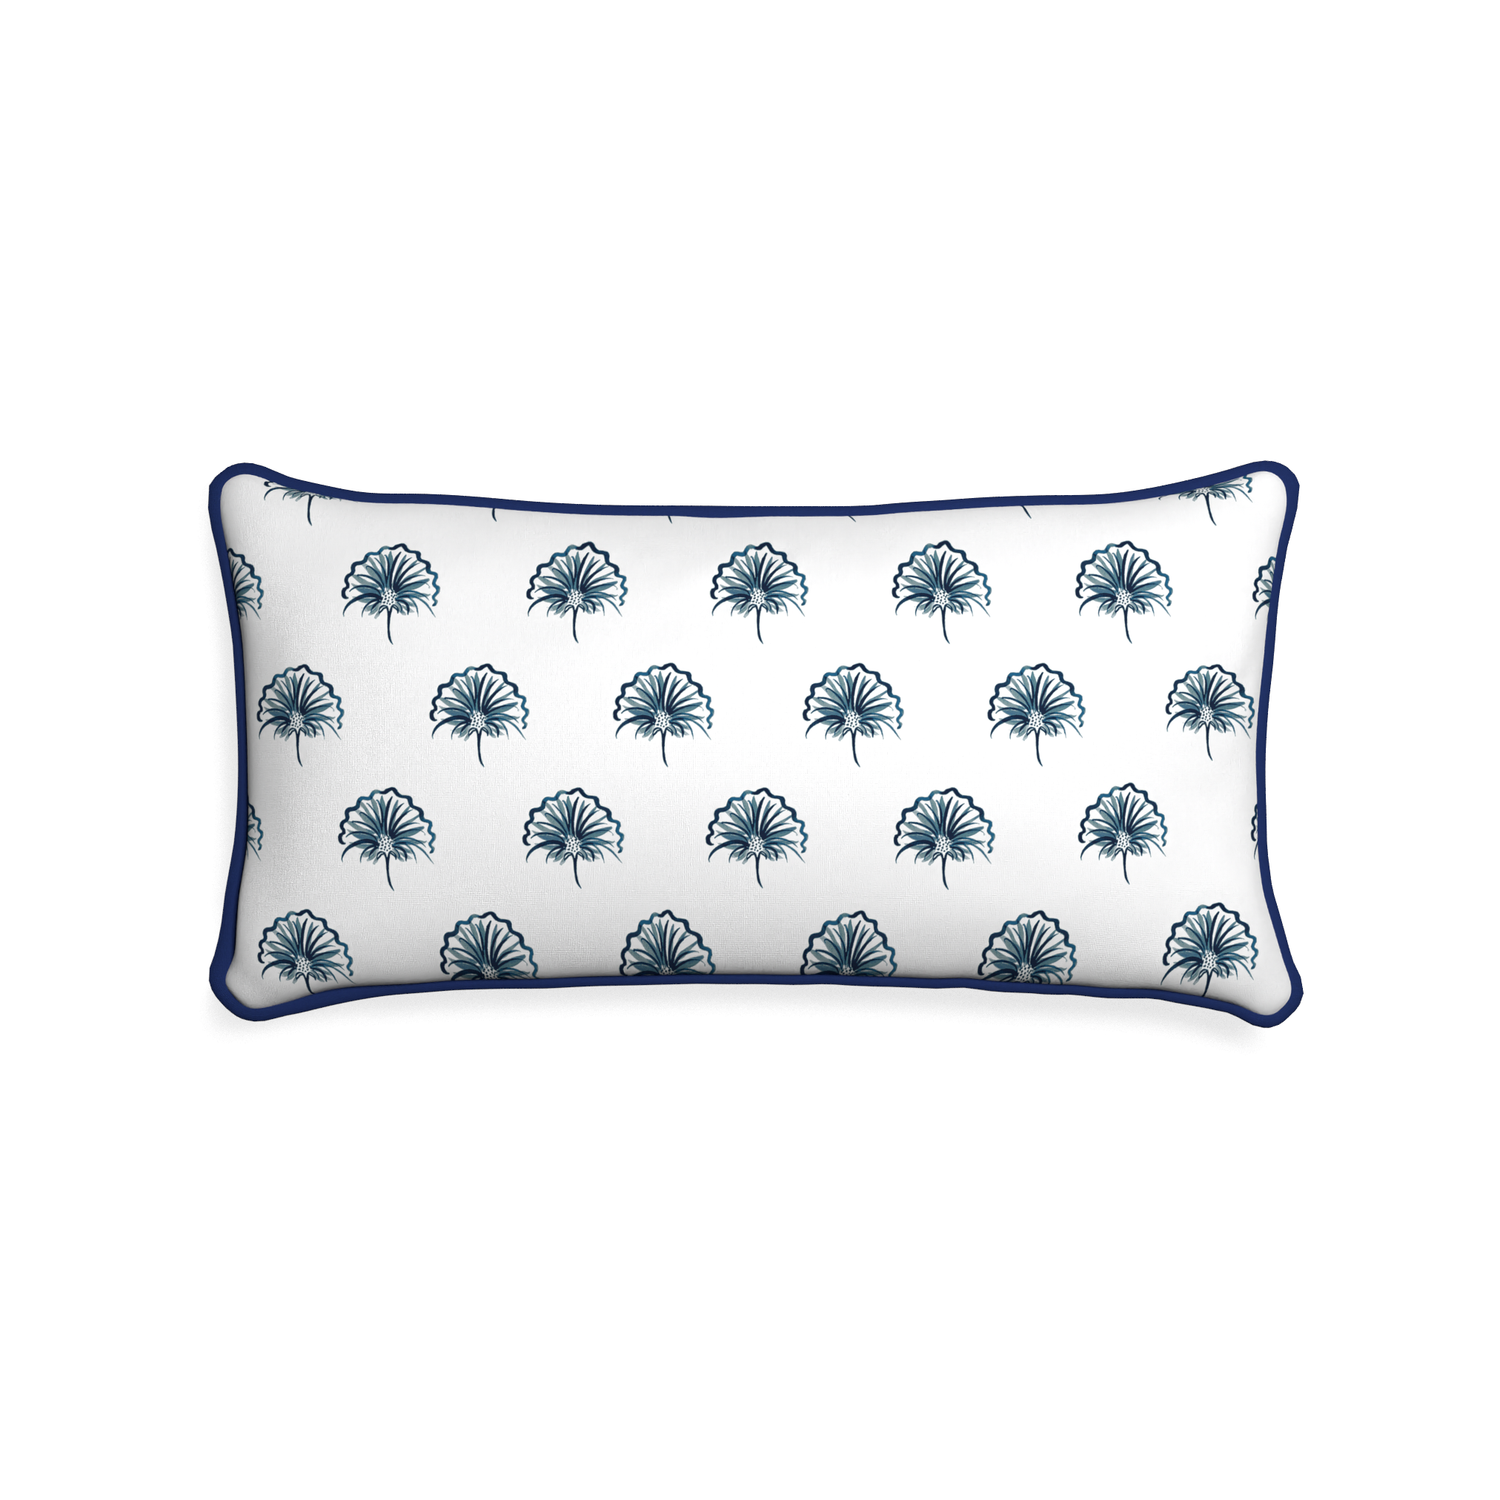 Midi-lumbar penelope midnight custom floral navypillow with midnight piping on white background